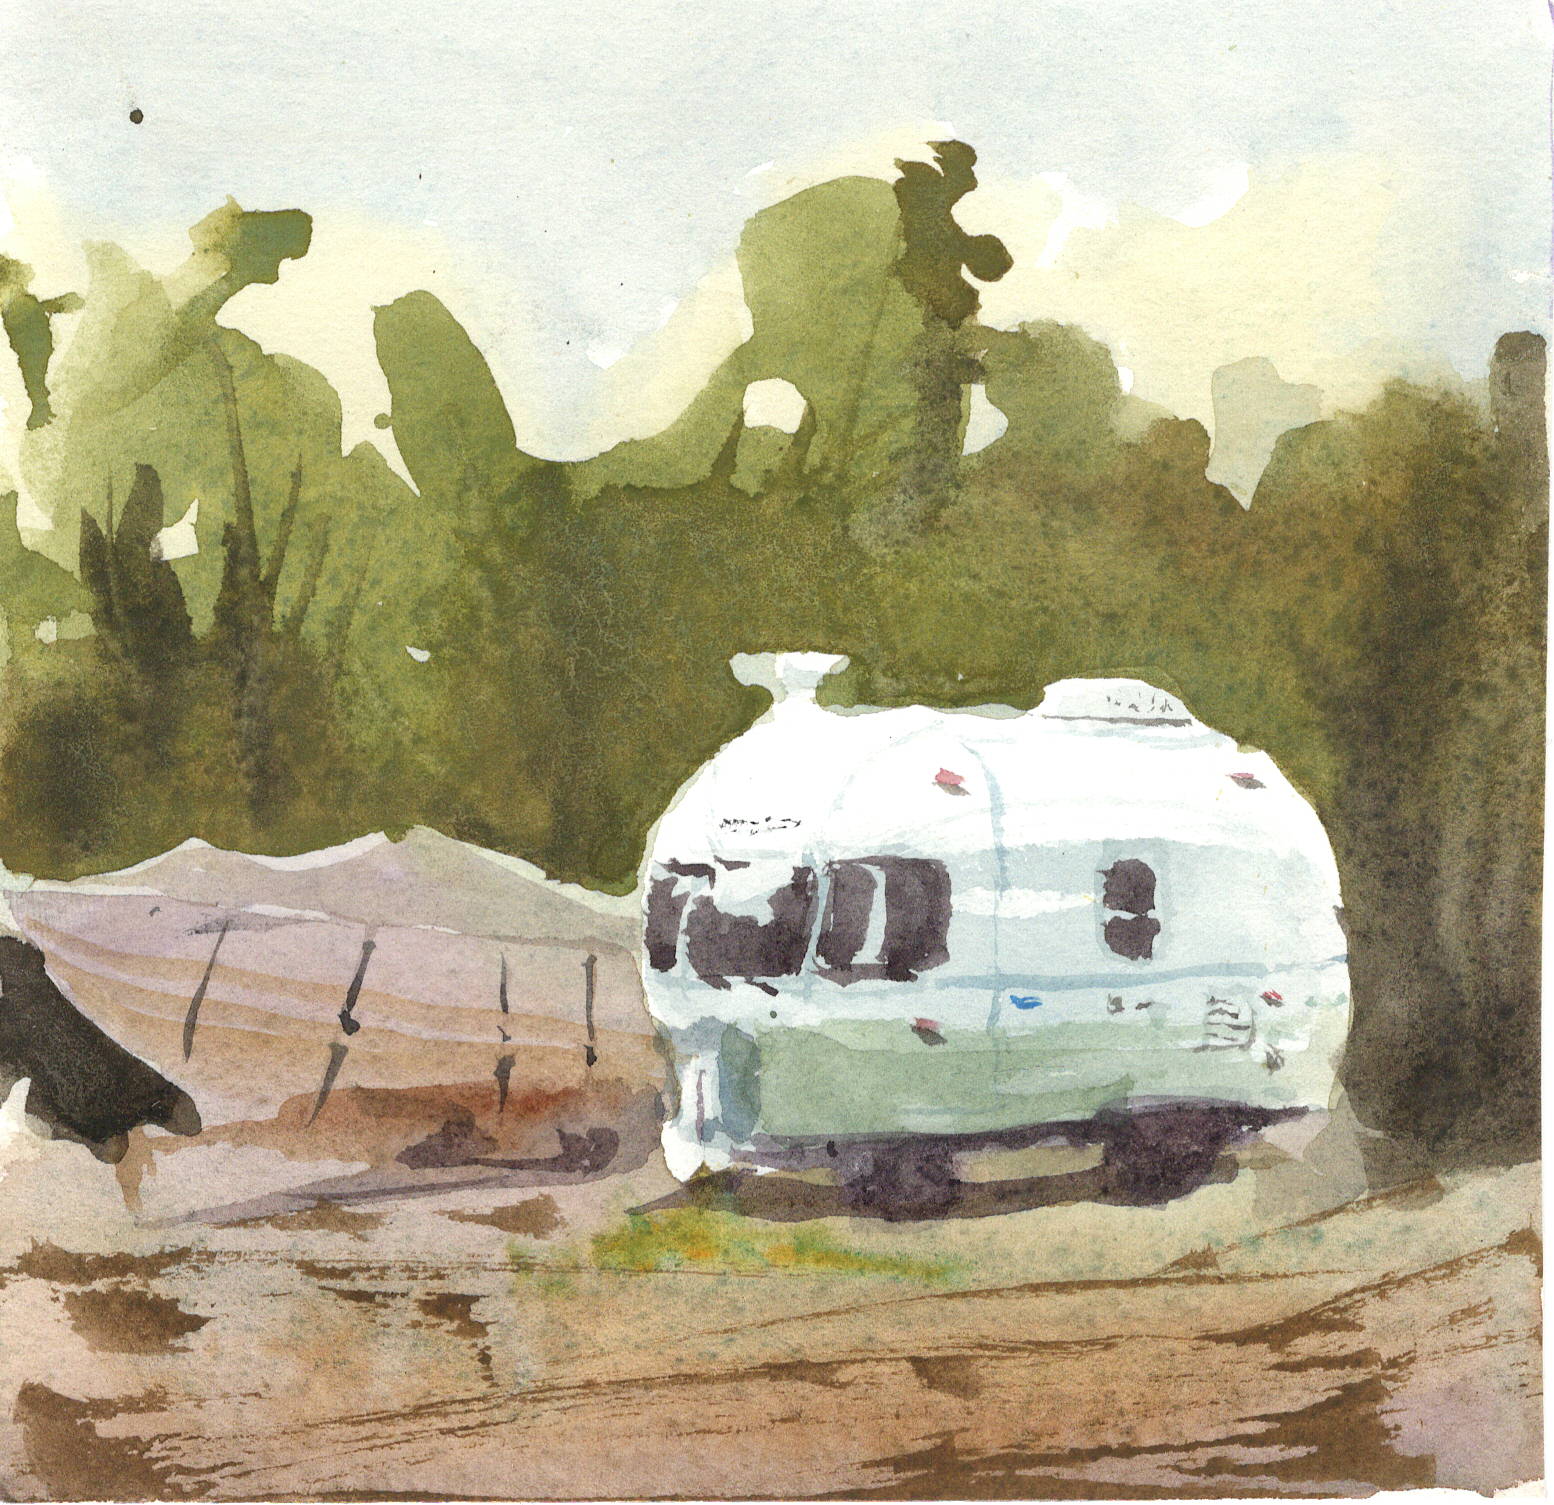 watercolor painting of a bambi camper by Mark Mclychok